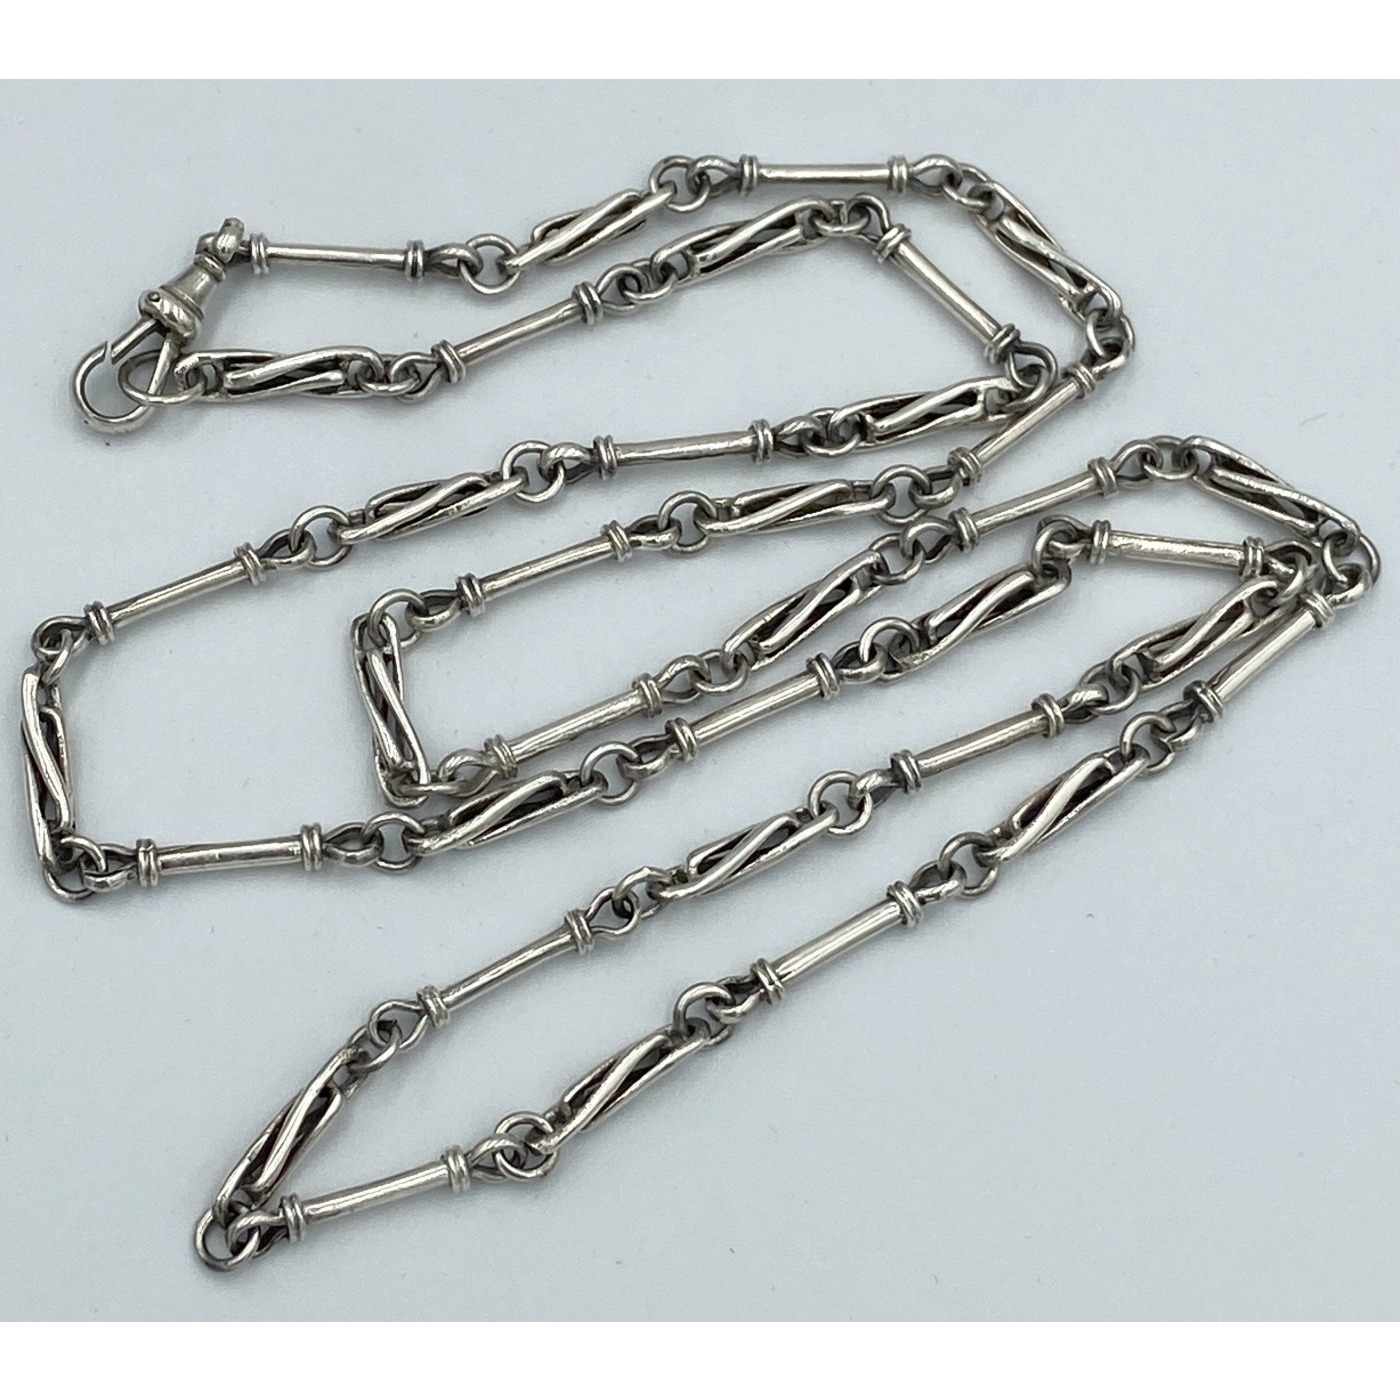 54" Alternating Twist Bar Link Antique English Silver Chain - Chain Only